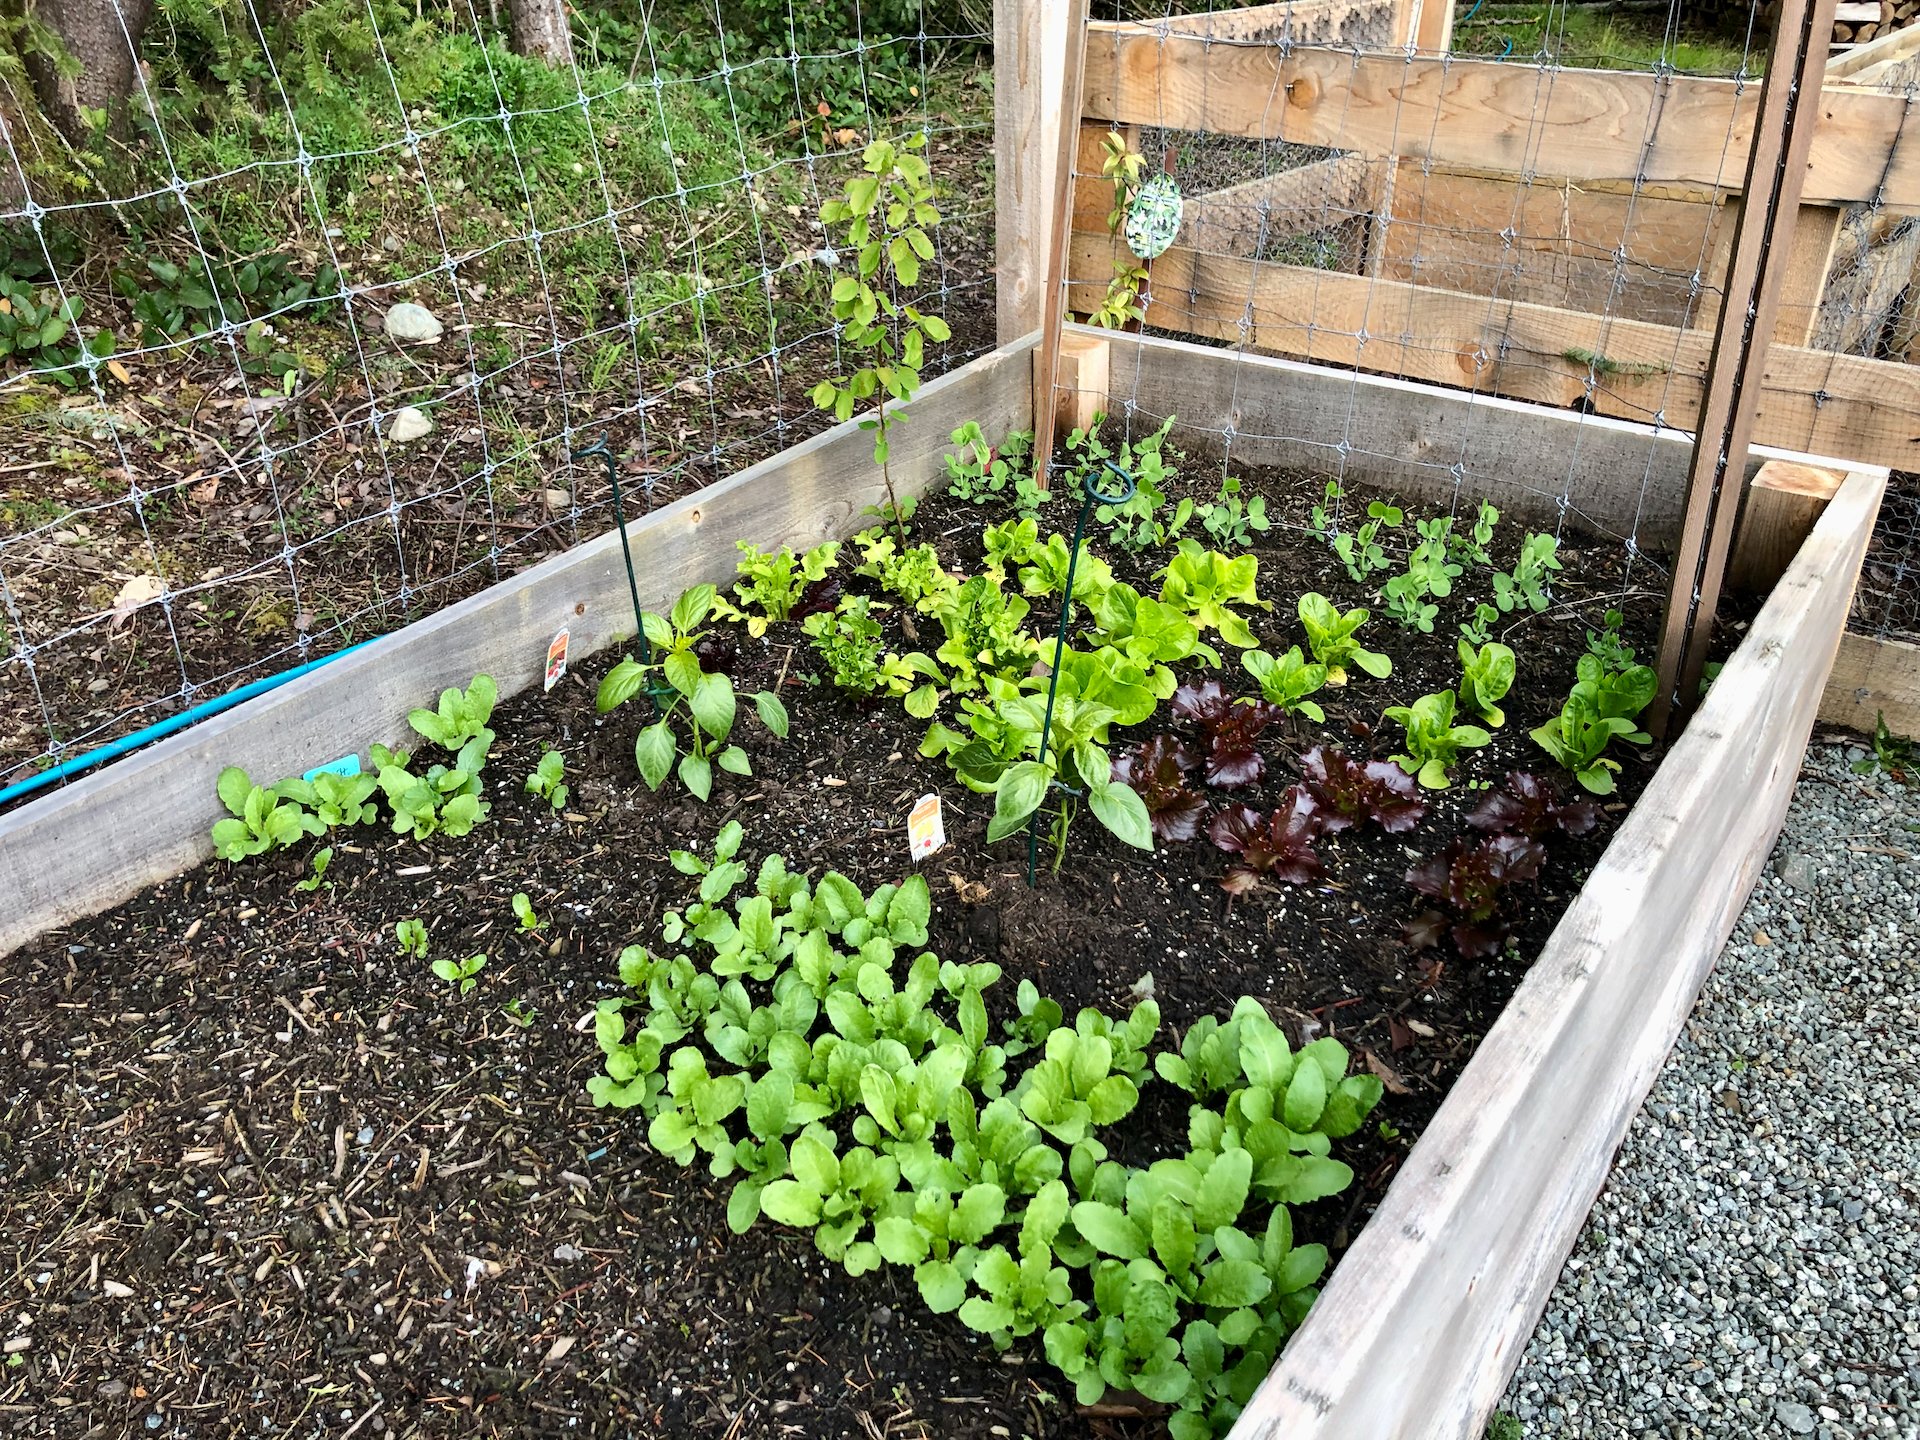  In the other bed, the radishes are loving the cool weather. And the peas at that end are also doing well. 